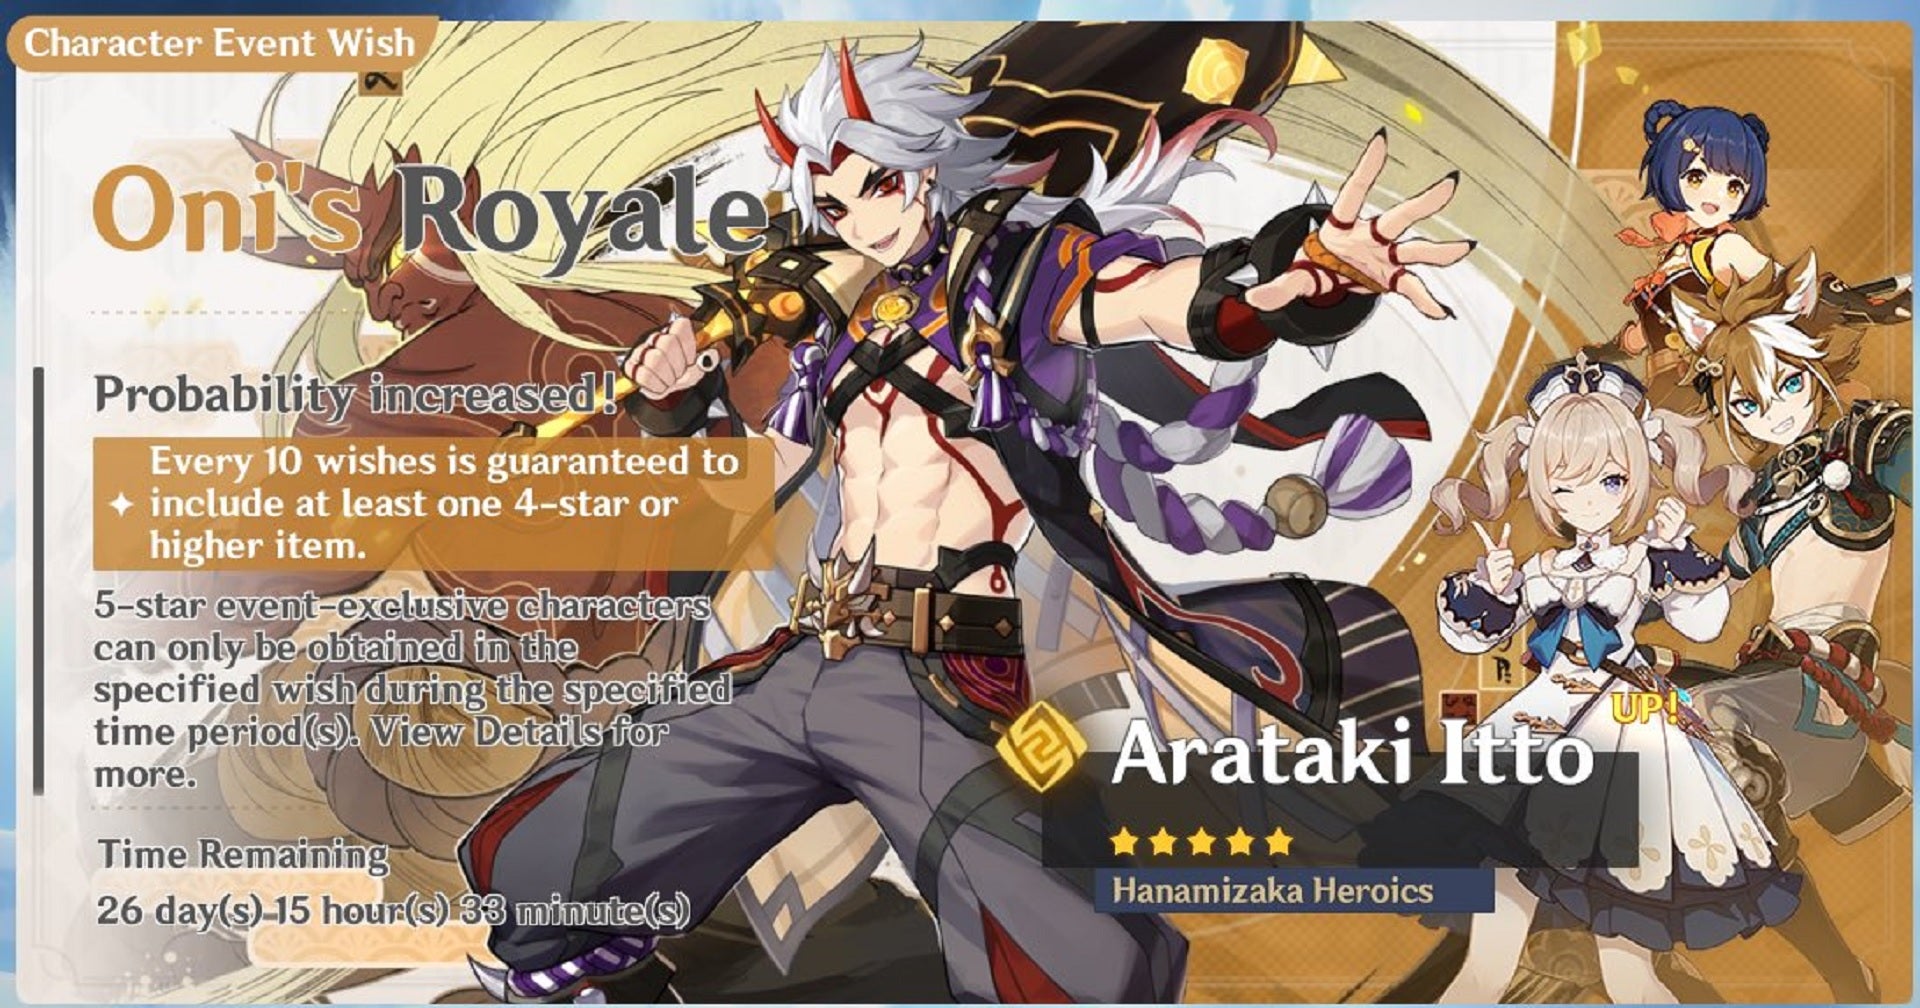 The Oni's Royale banner from Genshin Impact, featuring Itto, Gorou, Barbara, and Xiangling. This version was released ahead of time on miHoYo's Twitter account.